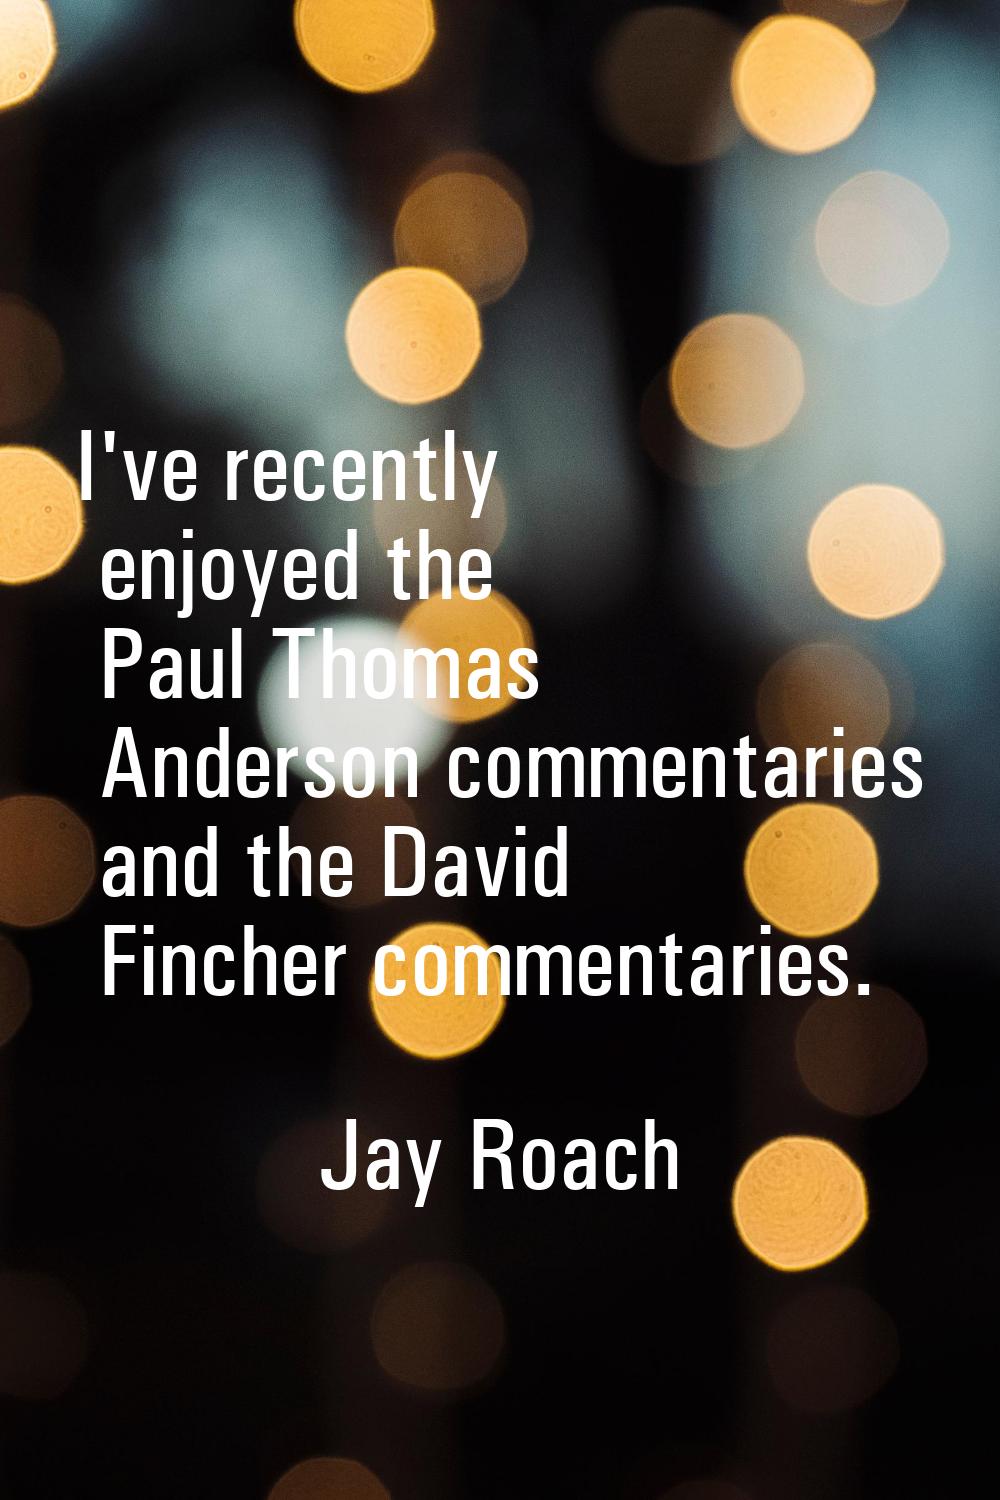 I've recently enjoyed the Paul Thomas Anderson commentaries and the David Fincher commentaries.